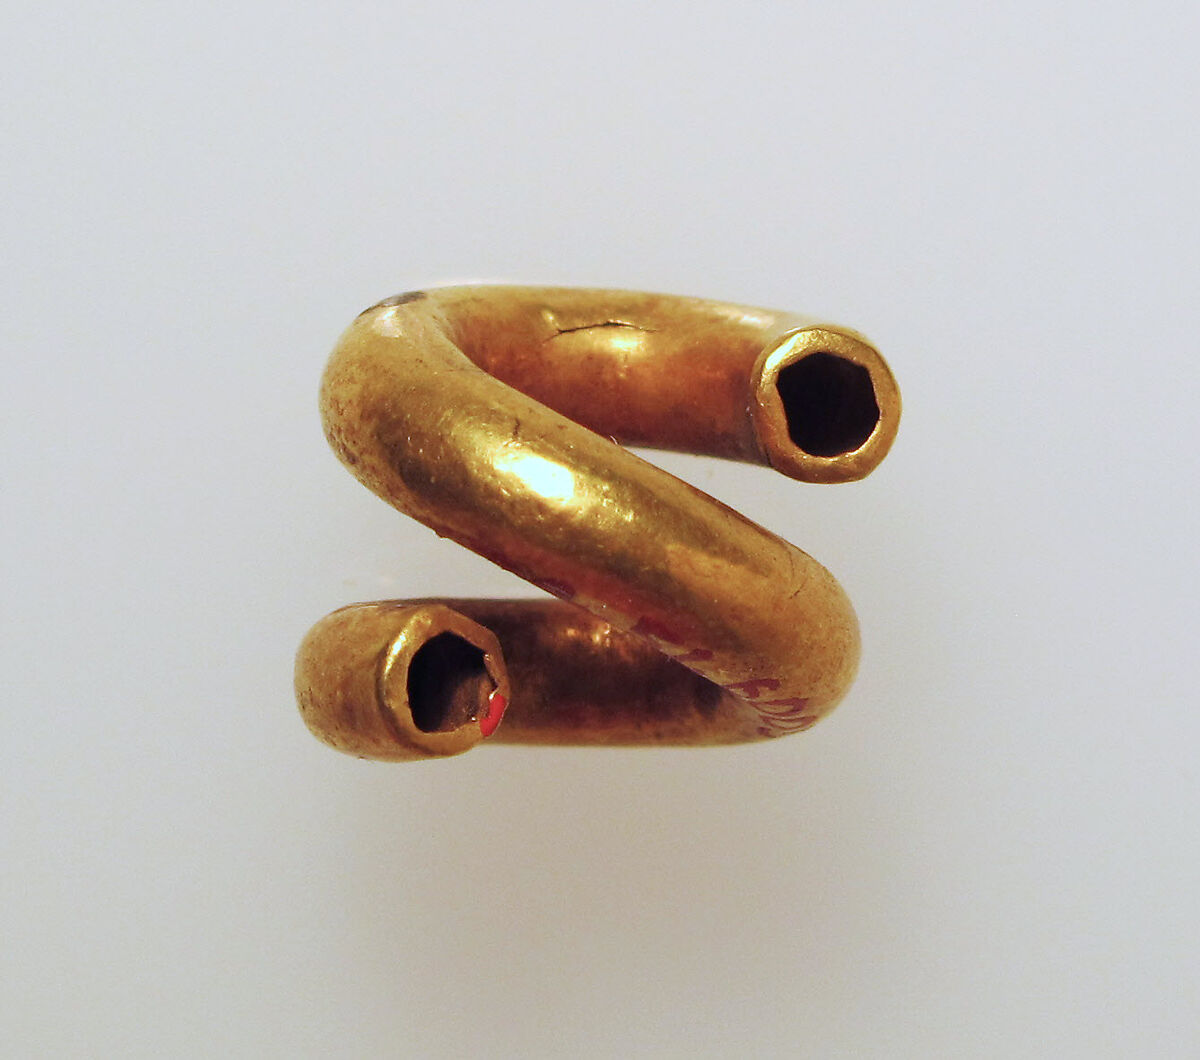 Gold and copper alloy spiral, Gold, Cypriot 